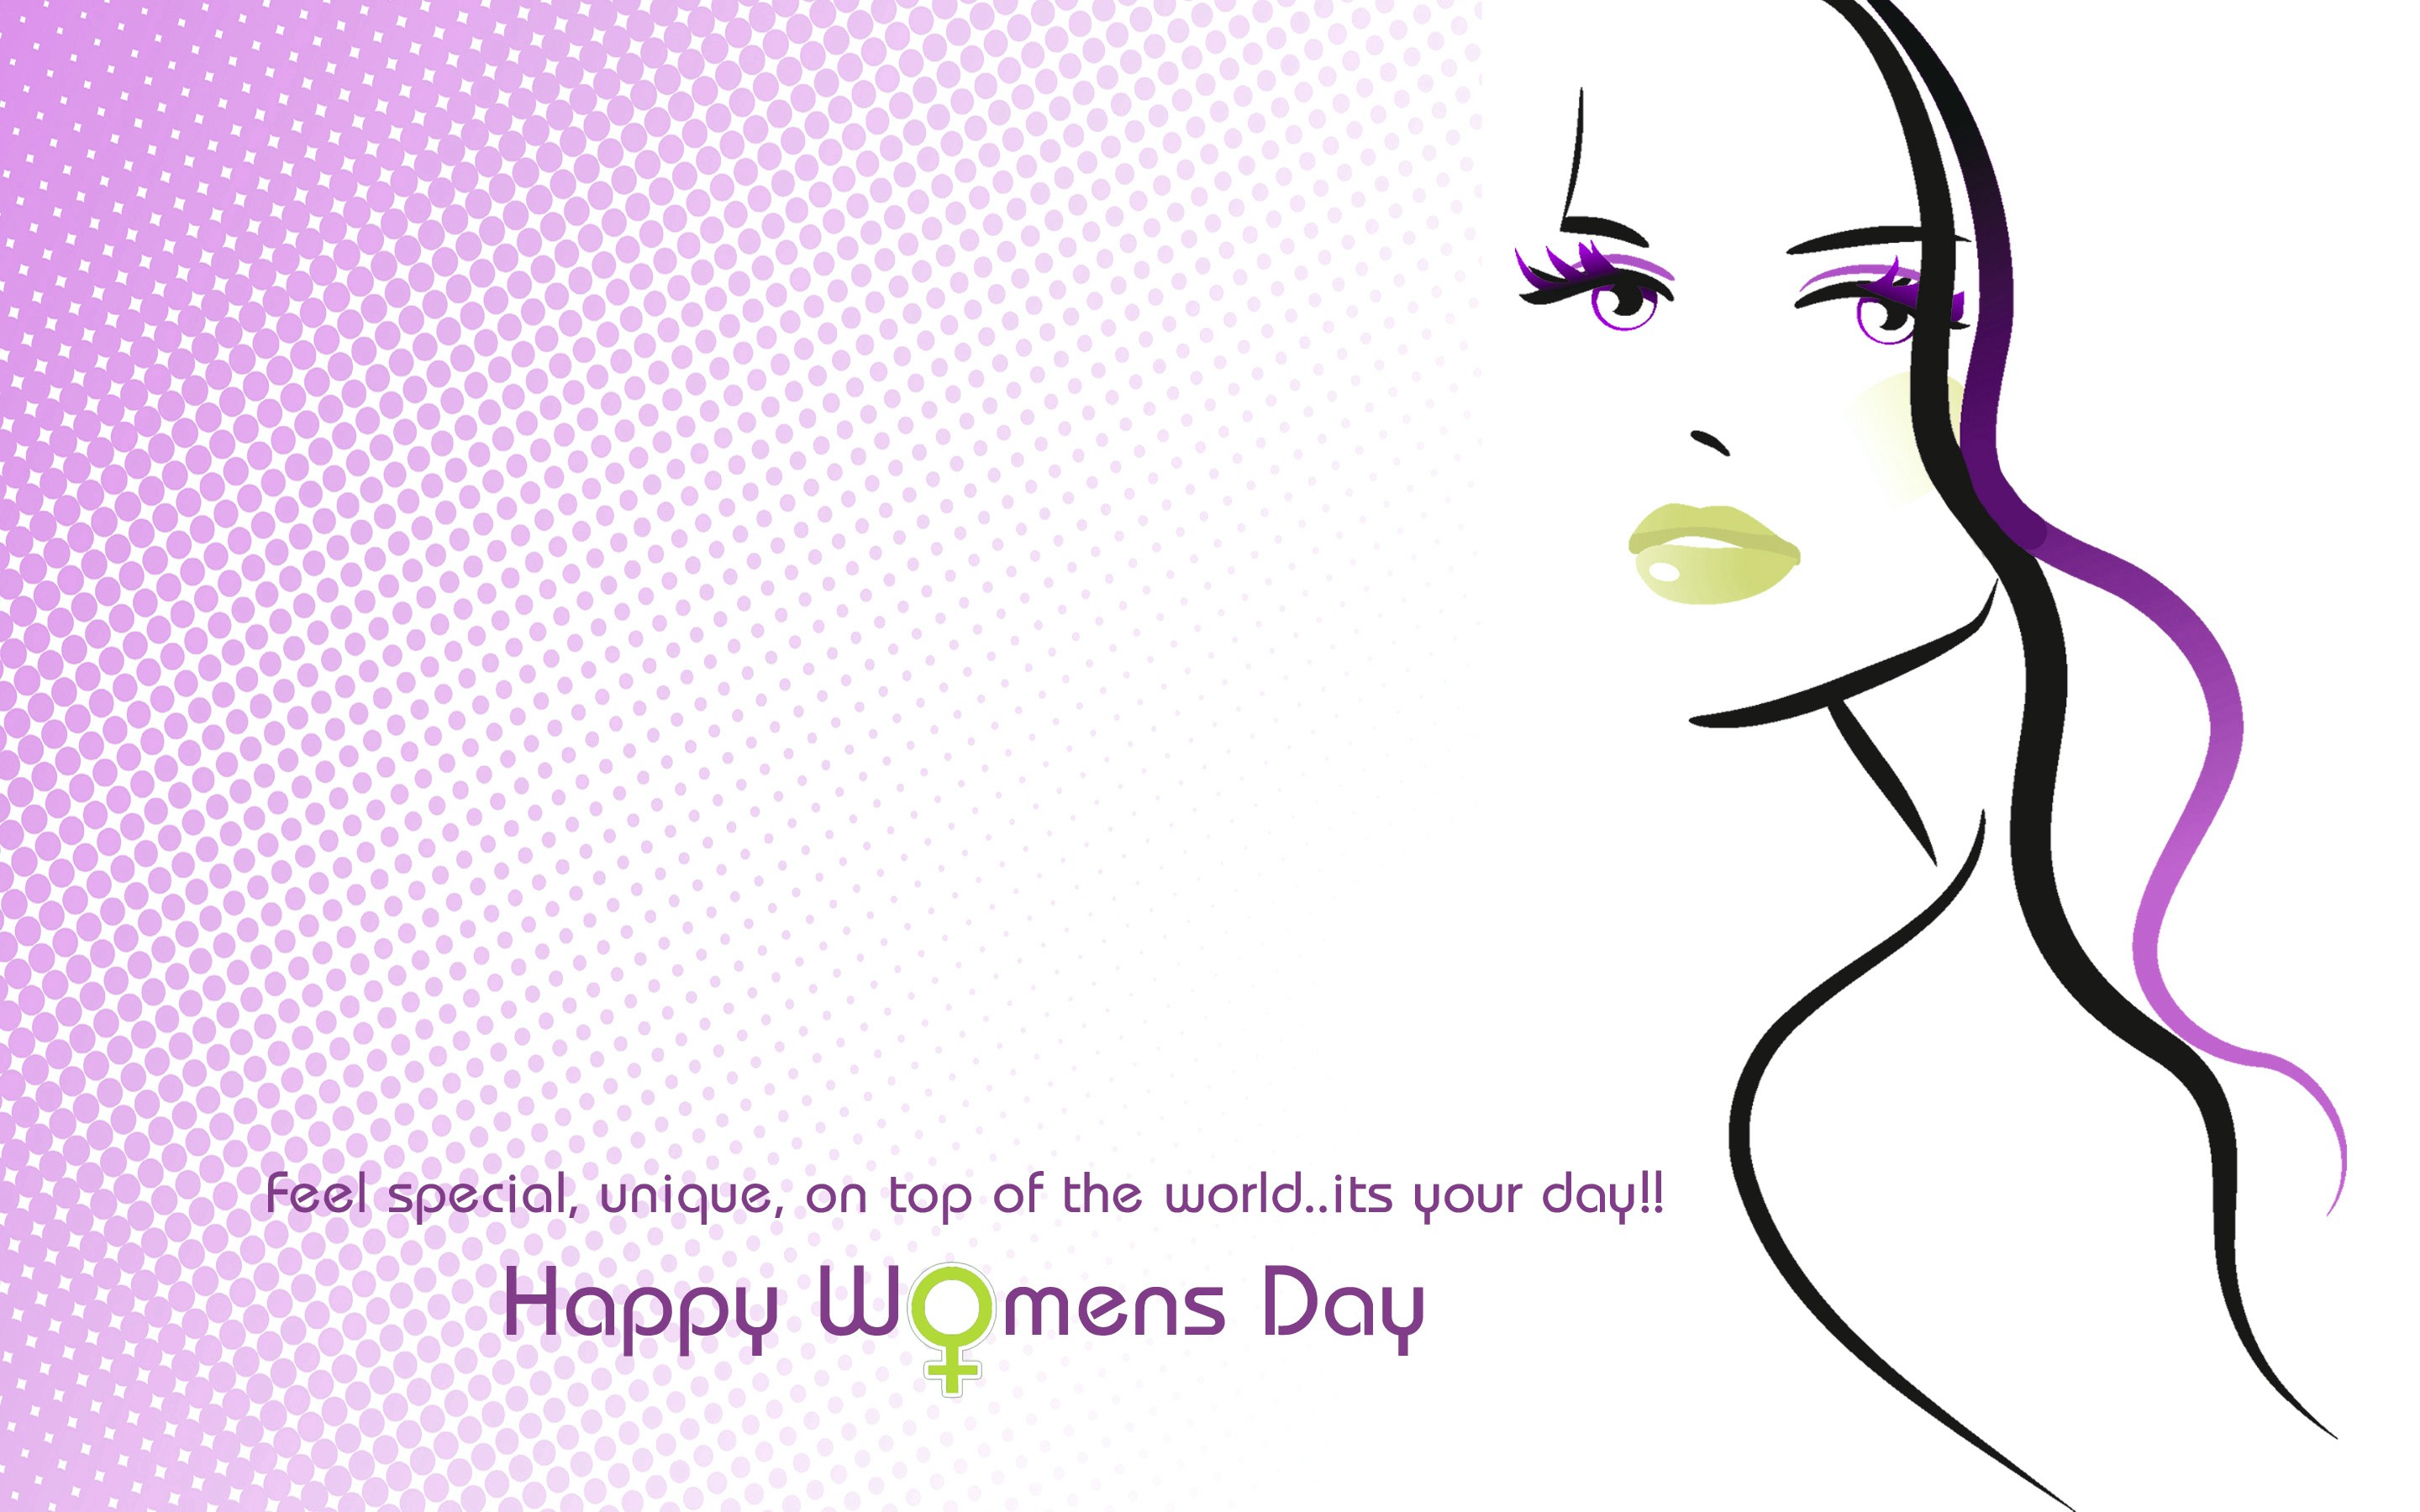 holiday, women's day, face, happy women's day, statement